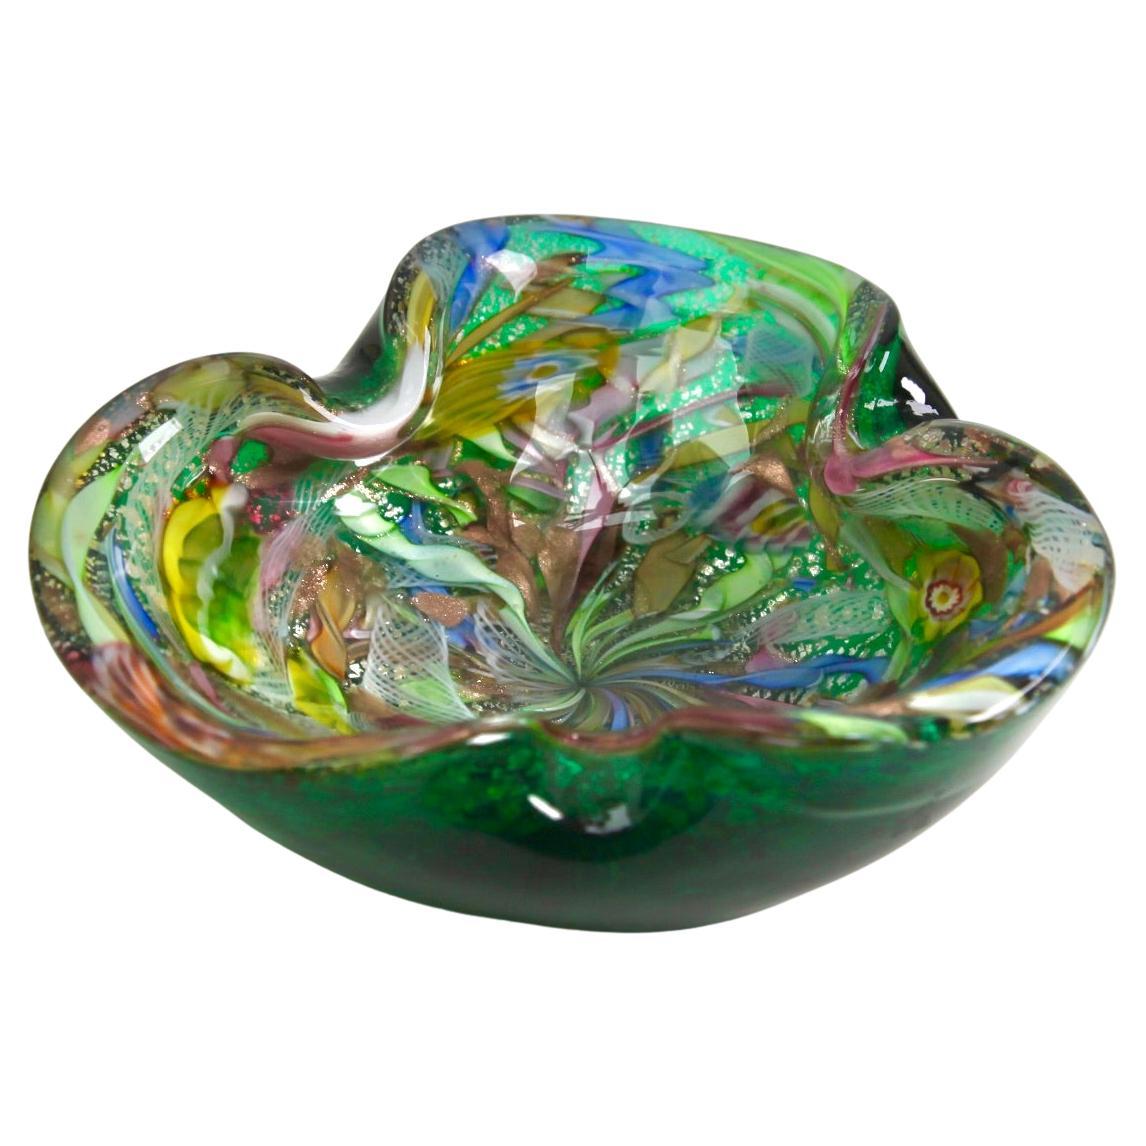 Murano Art Glass Bowl Black Shell, Metals and Bright Colors, Attributed to AVEM